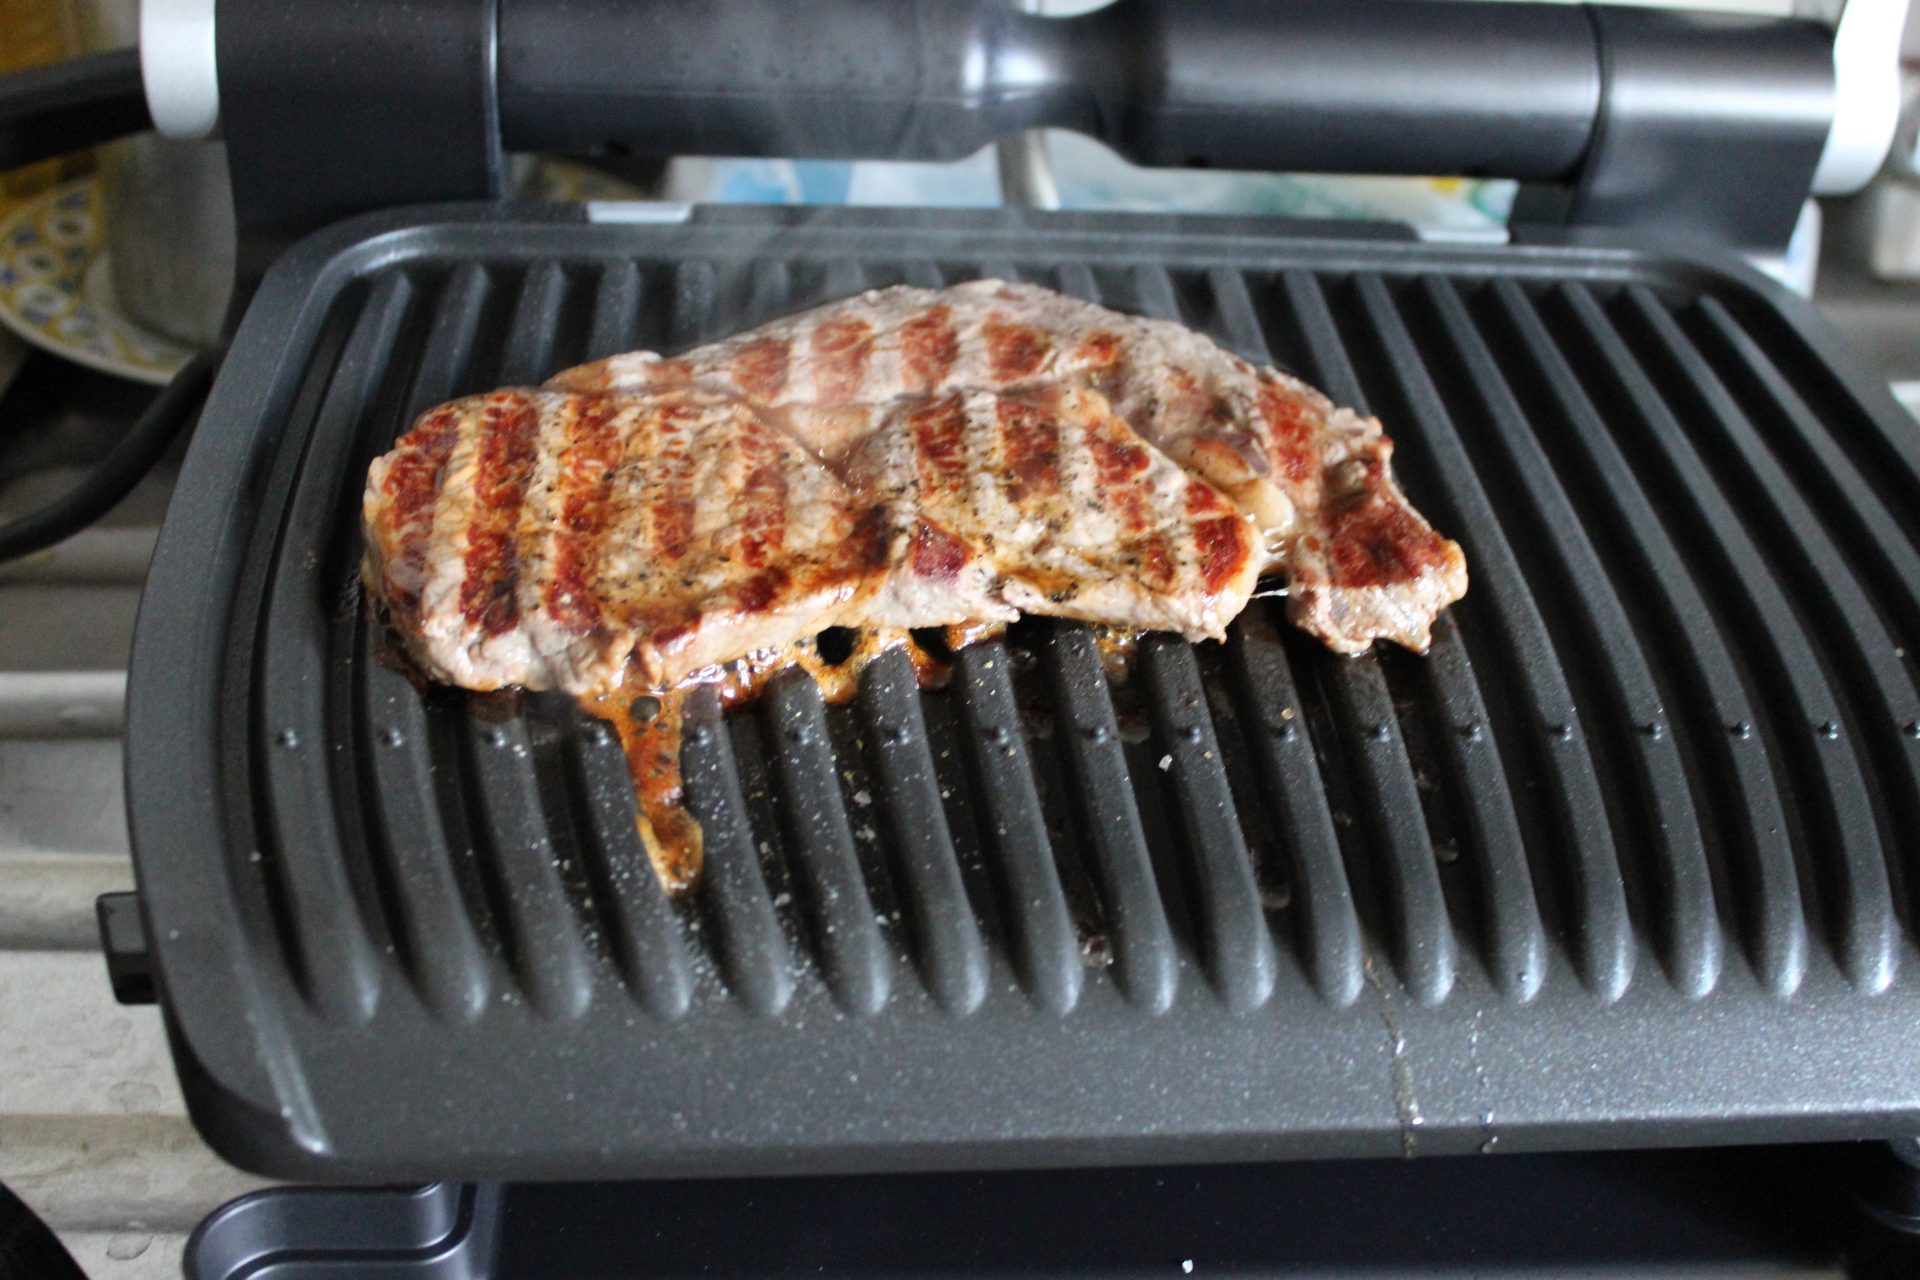 The Tefal OptiGrill Makes Grilling Easy - A Review